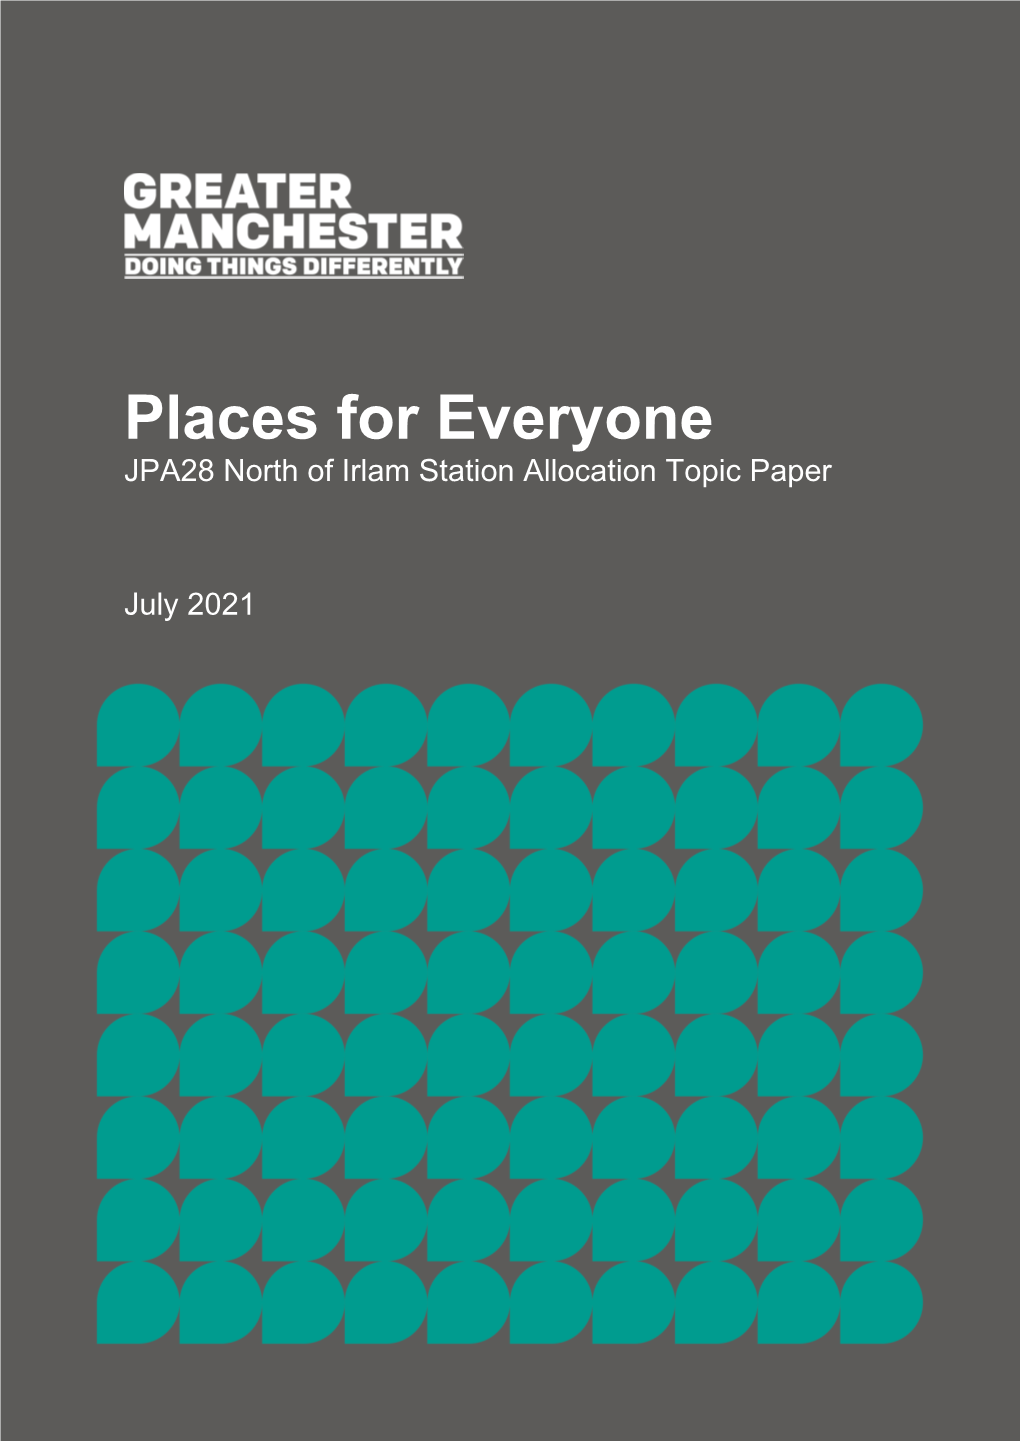 Places for Everyone JPA28 North of Irlam Station Allocation Topic Paper